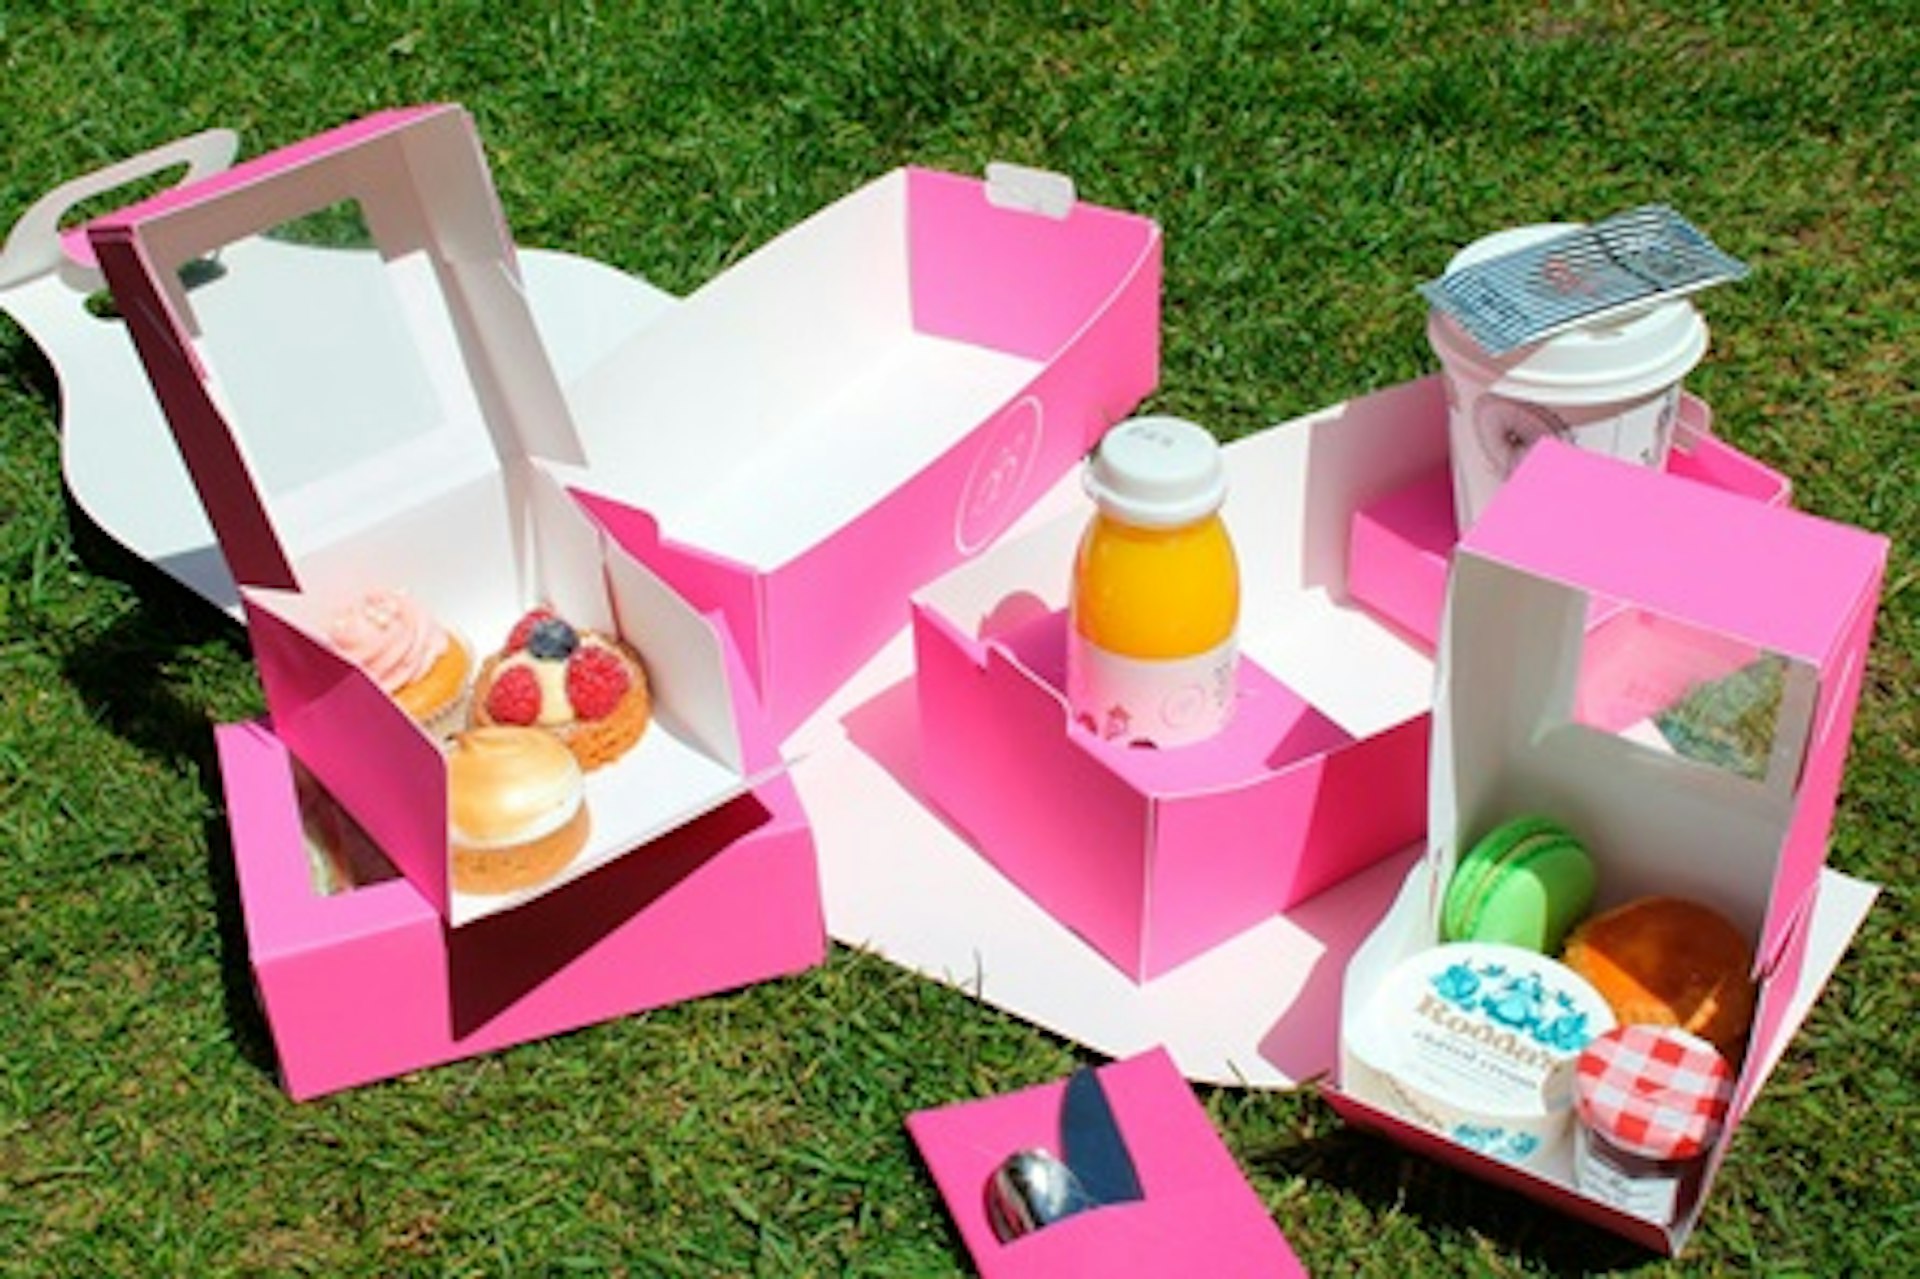 Picnic Box Afternoon Tea for Two from Brigit's Bakery Covent Garden 1